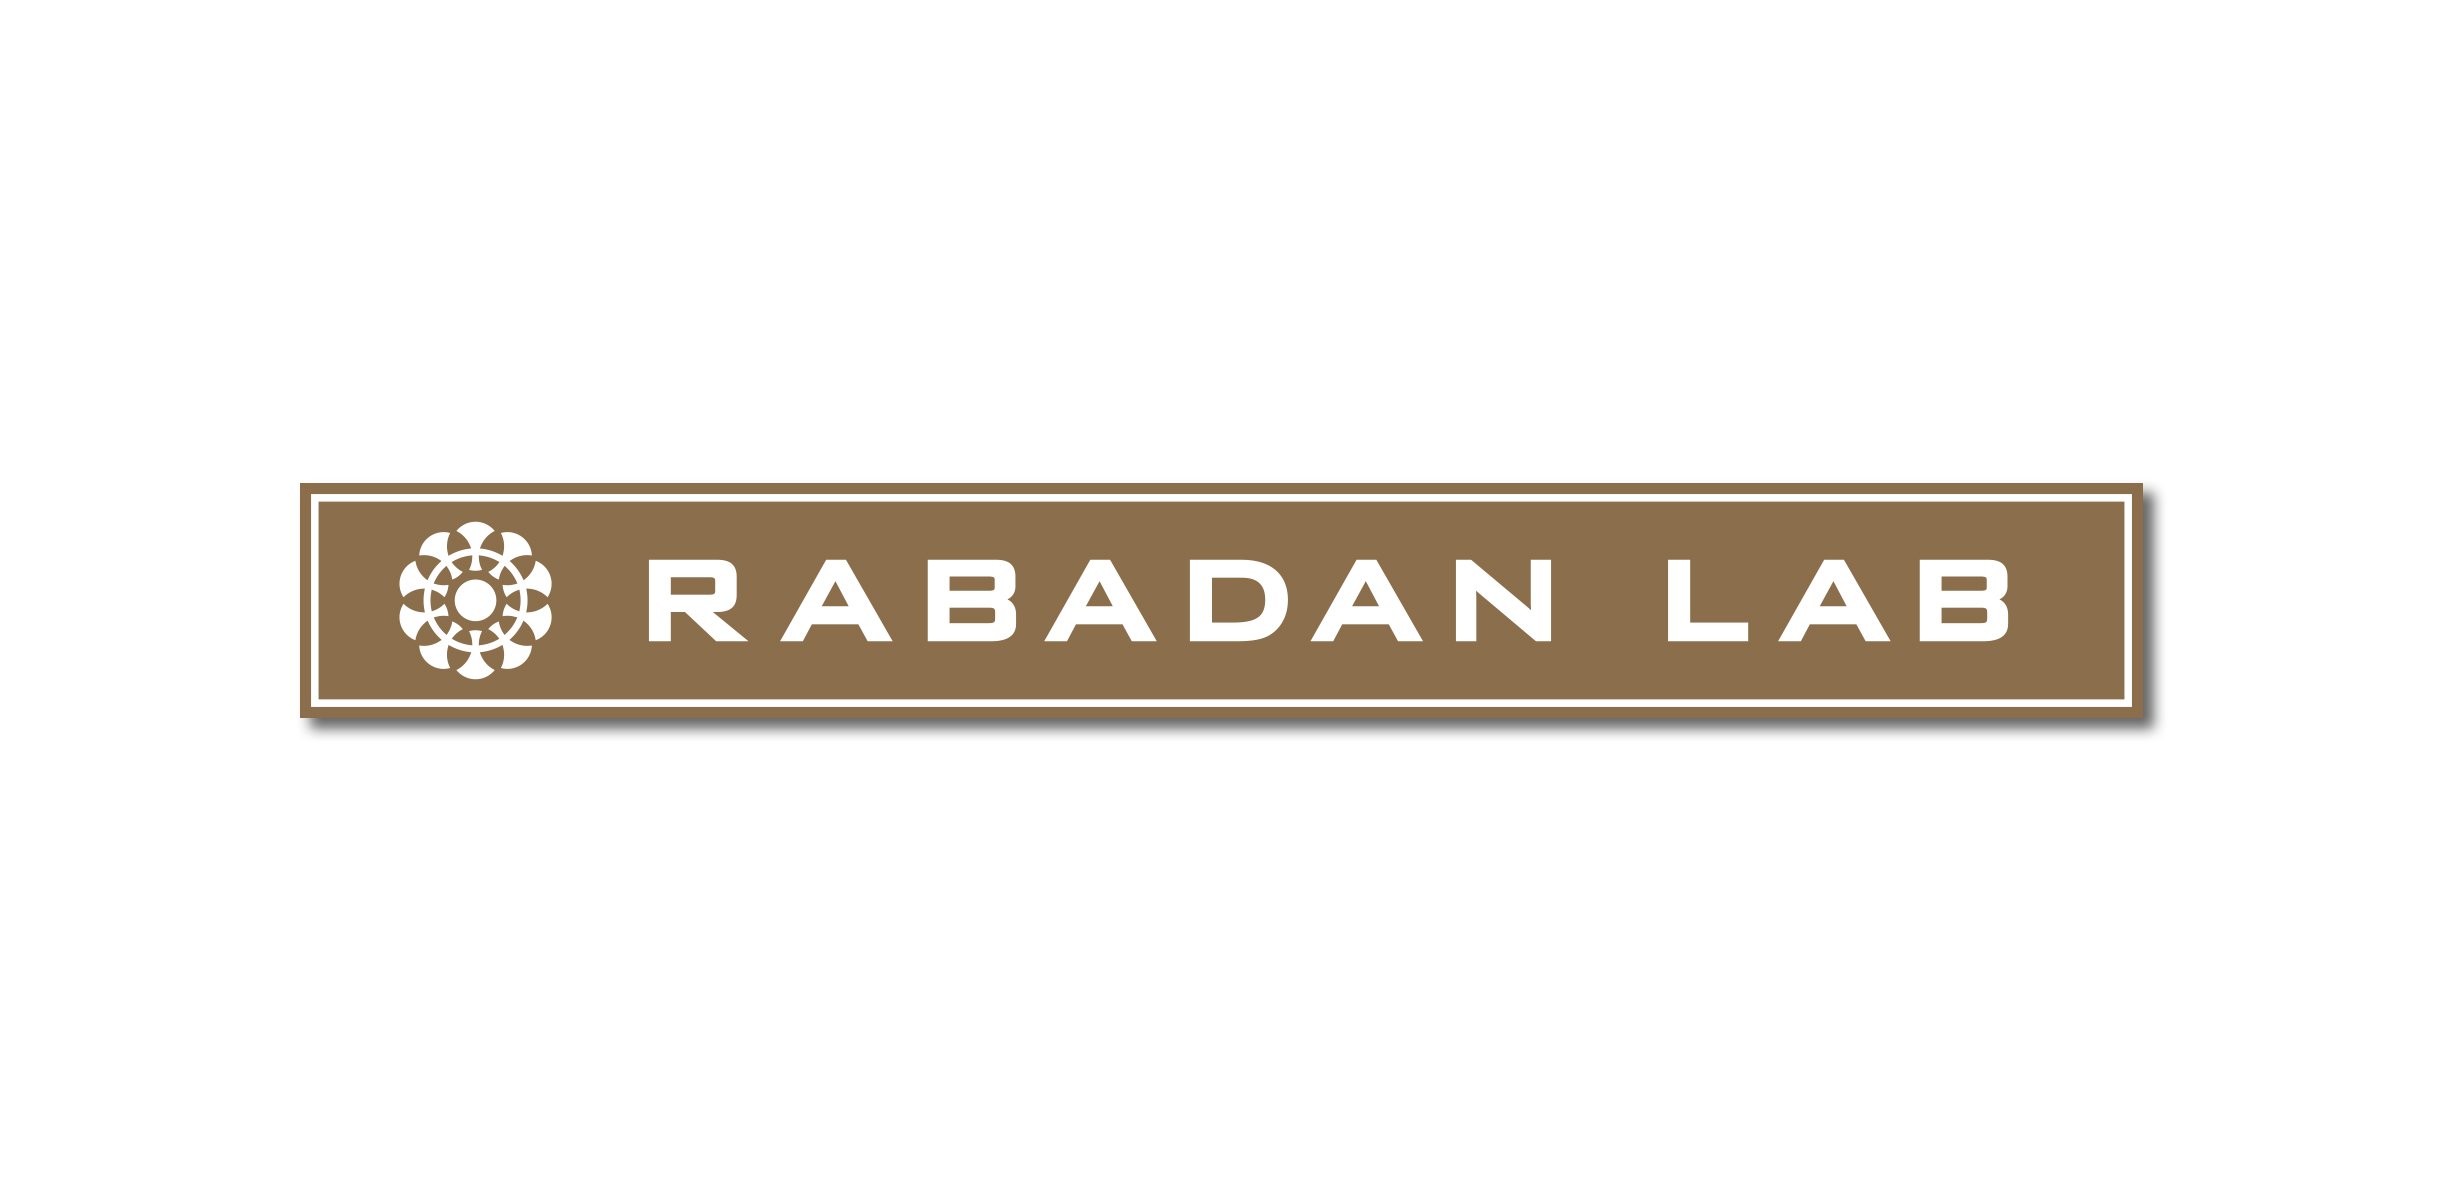 Logo and Visual ID design for Rabadan Lab at Columbia University by SP STUDIOS.